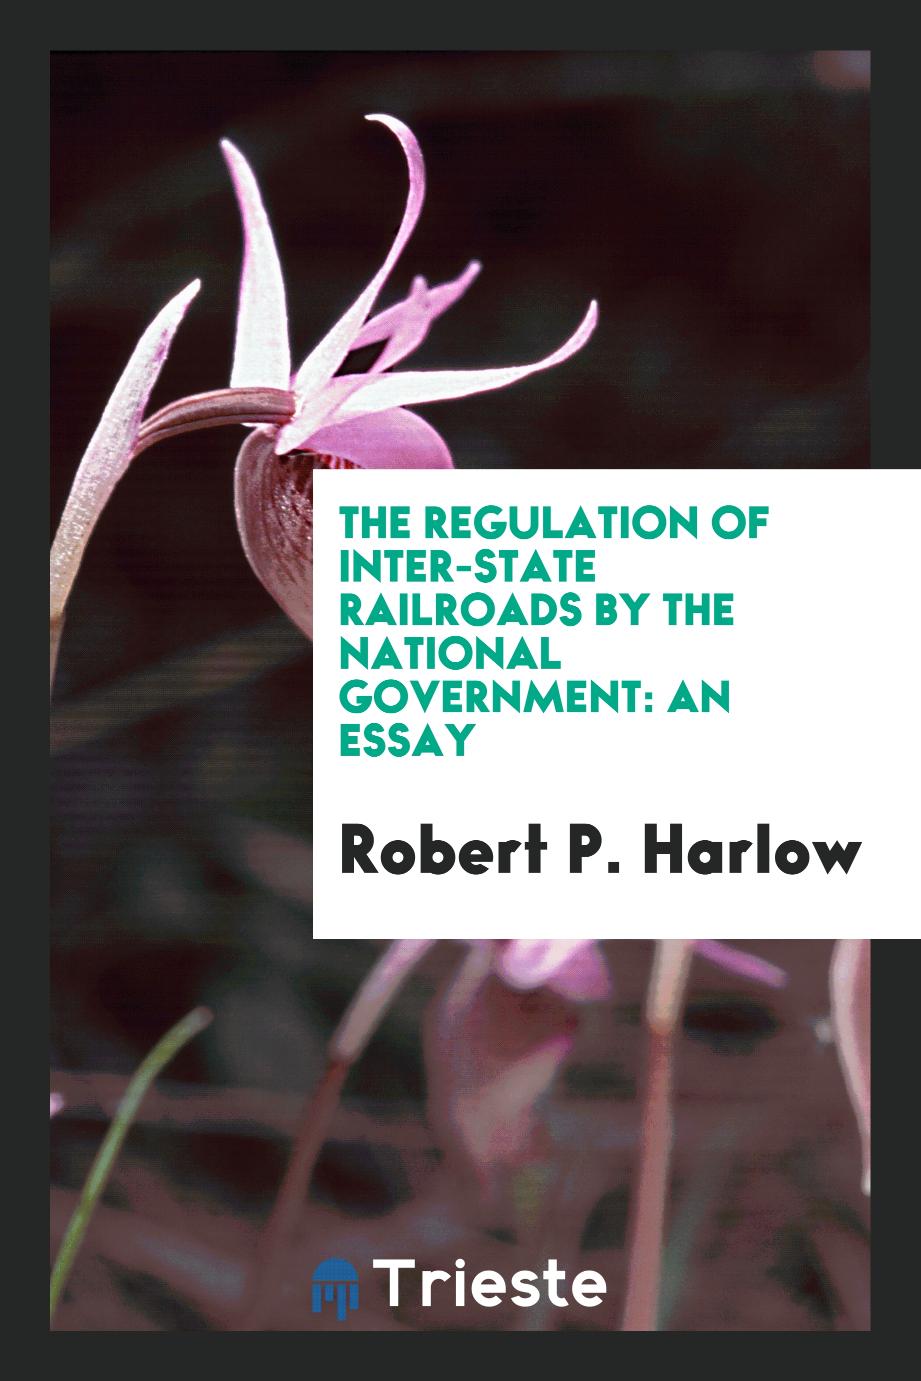 The Regulation of Inter-state Railroads by the National Government: An Essay